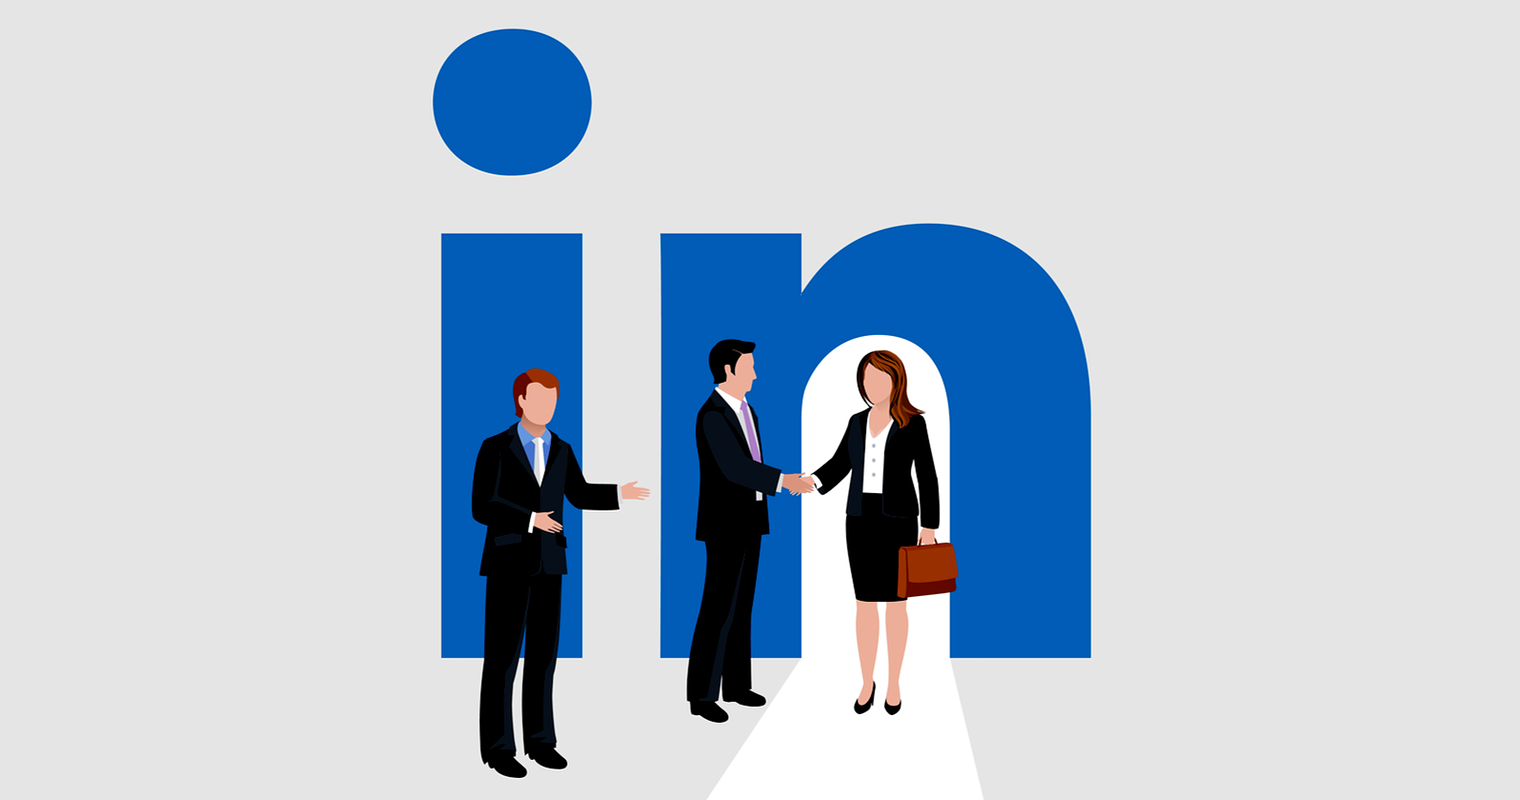 How to Optimize Your LinkedIn Profile for Digital Marketing Jobs